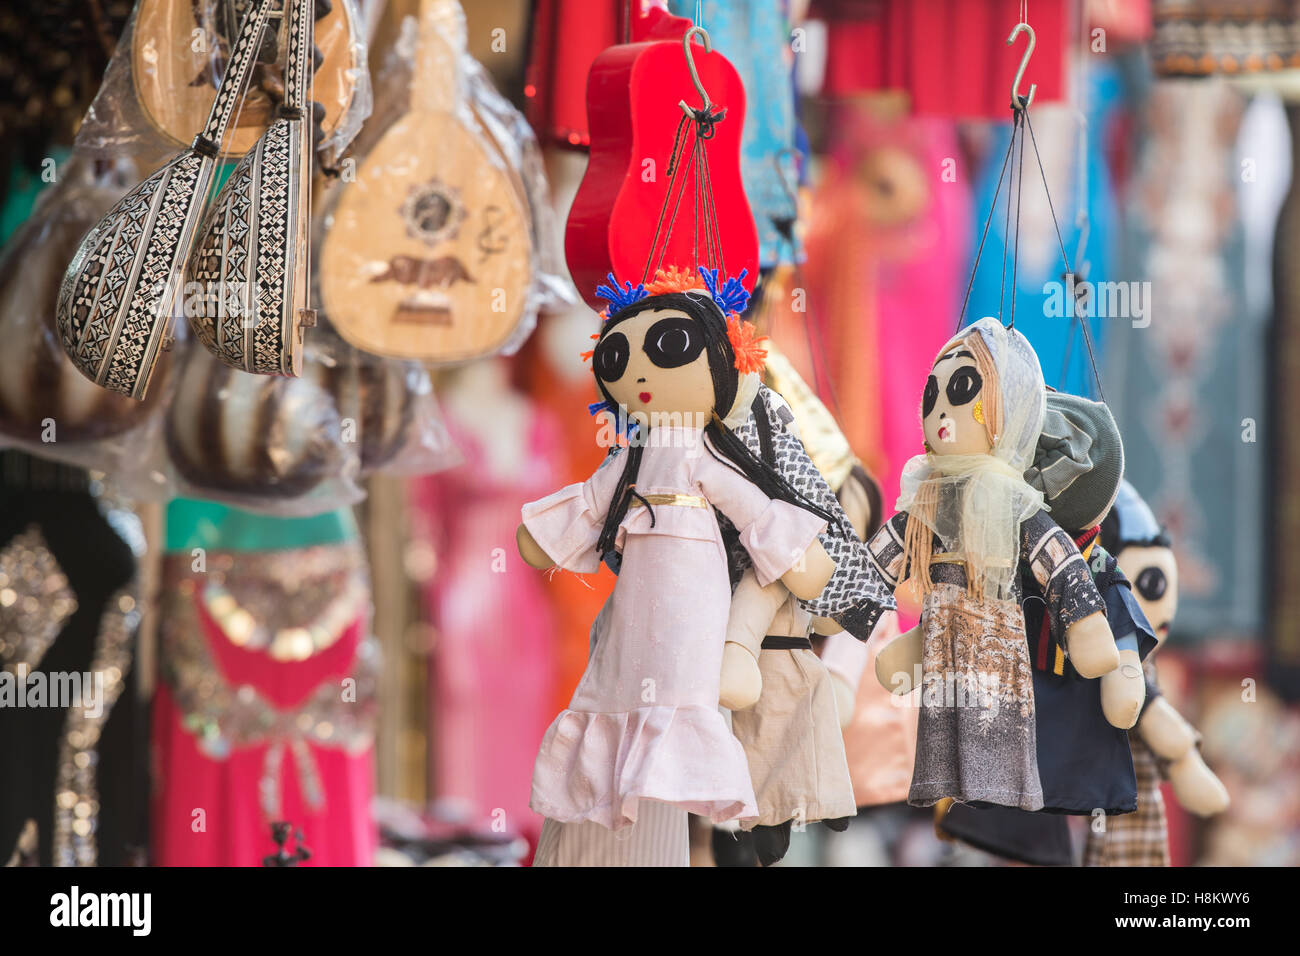 Cairo, Egypt. Close up of handmade dolls, musical instruments (5 stringed oud) and other souvenirs for sale in a shop in the out Stock Photo